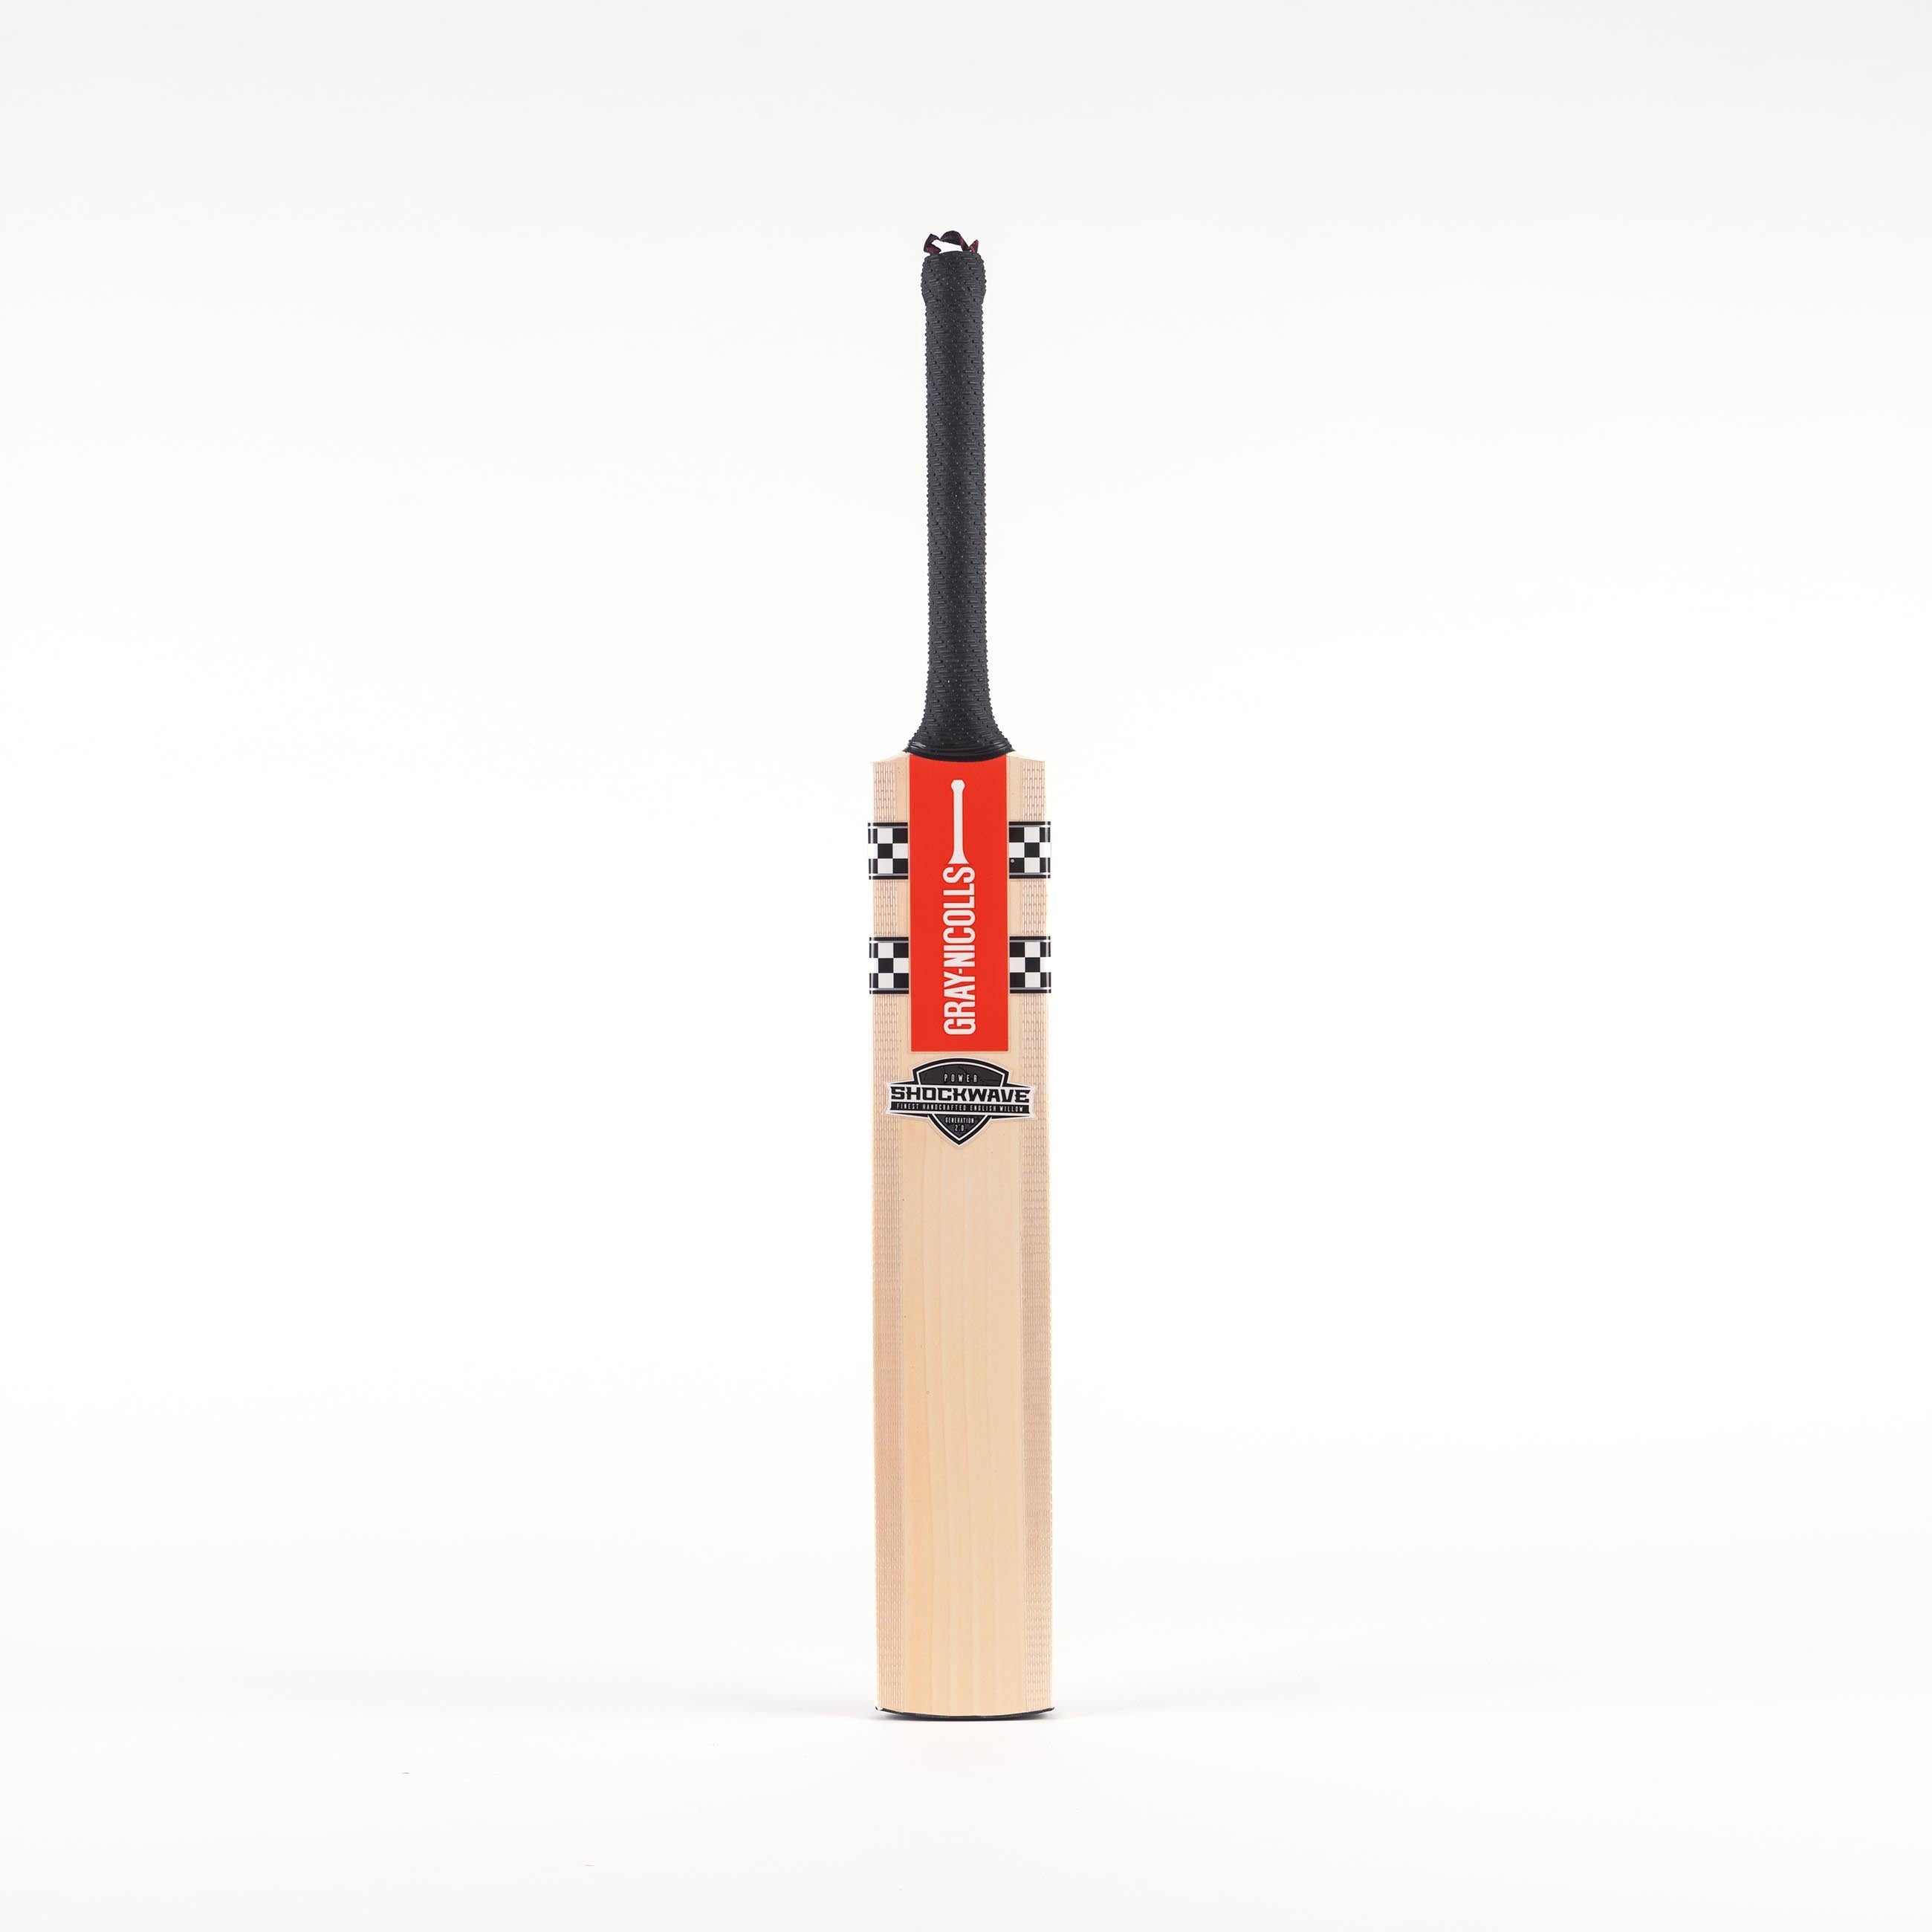 CACL24English Willow Bats Shockwave 2.0 Power, Face